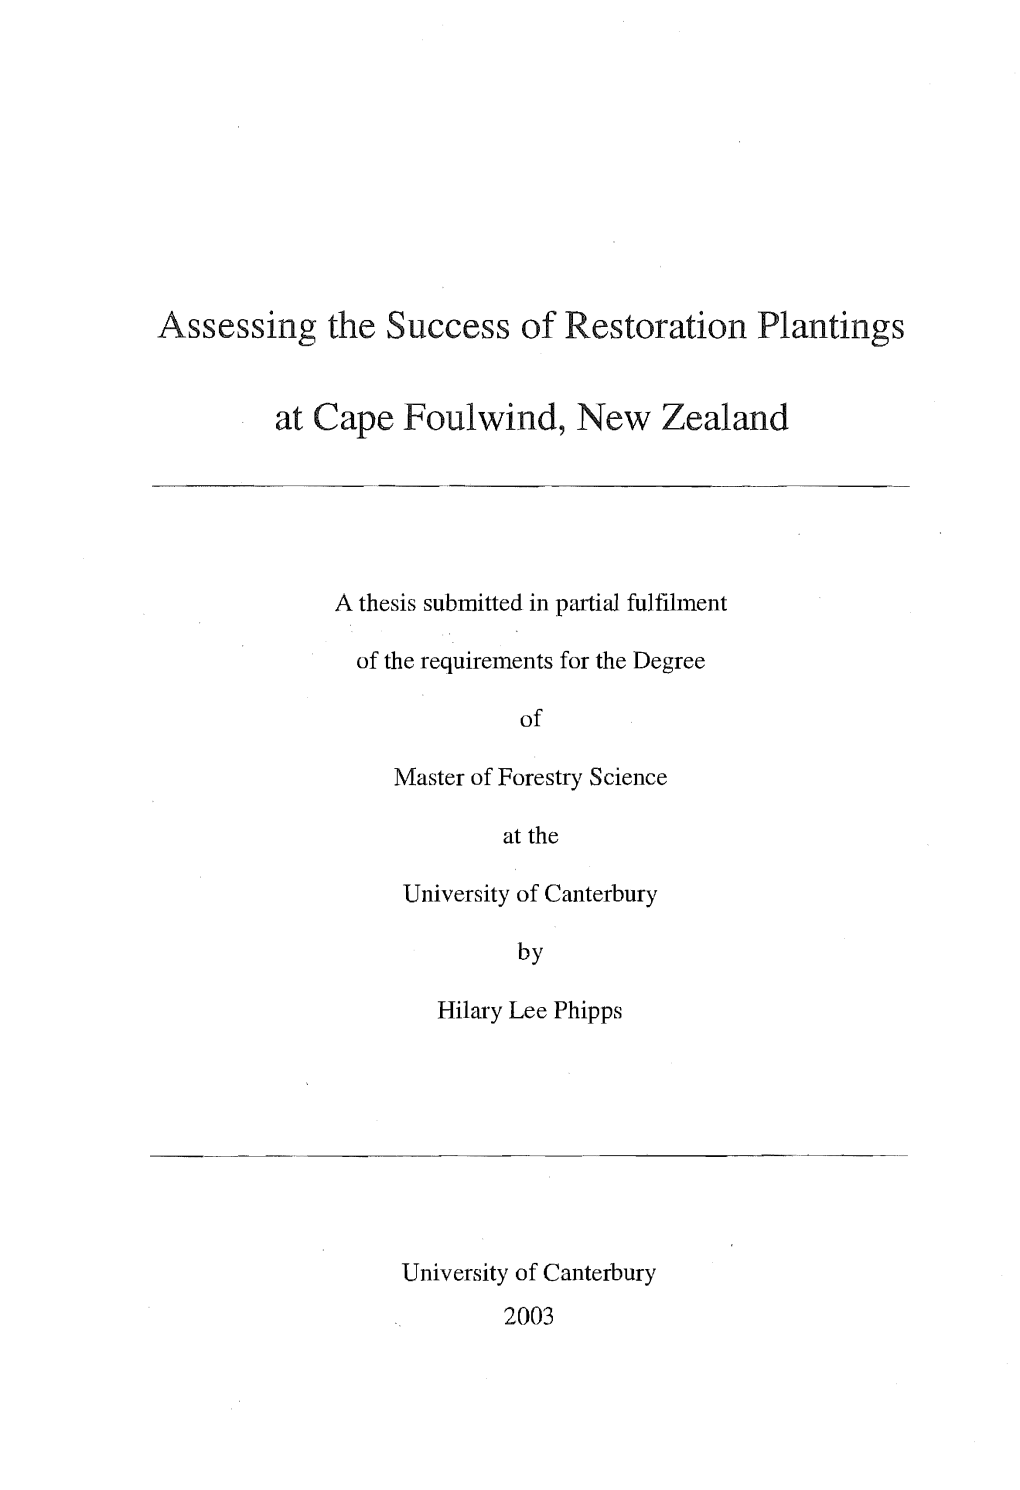 Assessing the Success of Restoration Plantings at Cape Foulwind, New